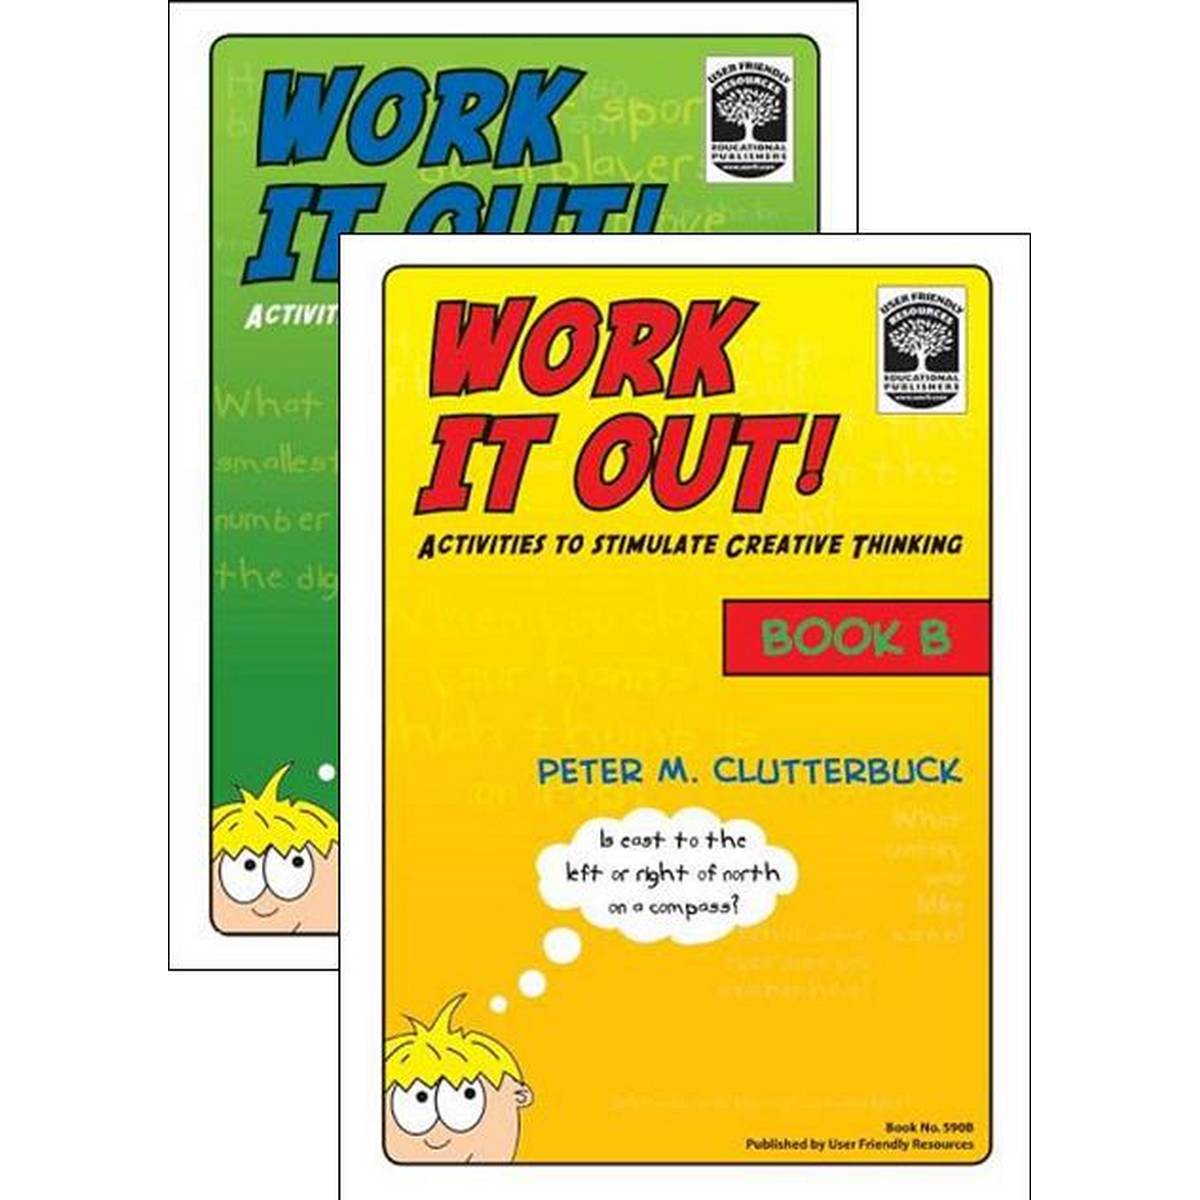 Work It Out - Activities to Stimulate Creative Thinking - Set (Book A & B)